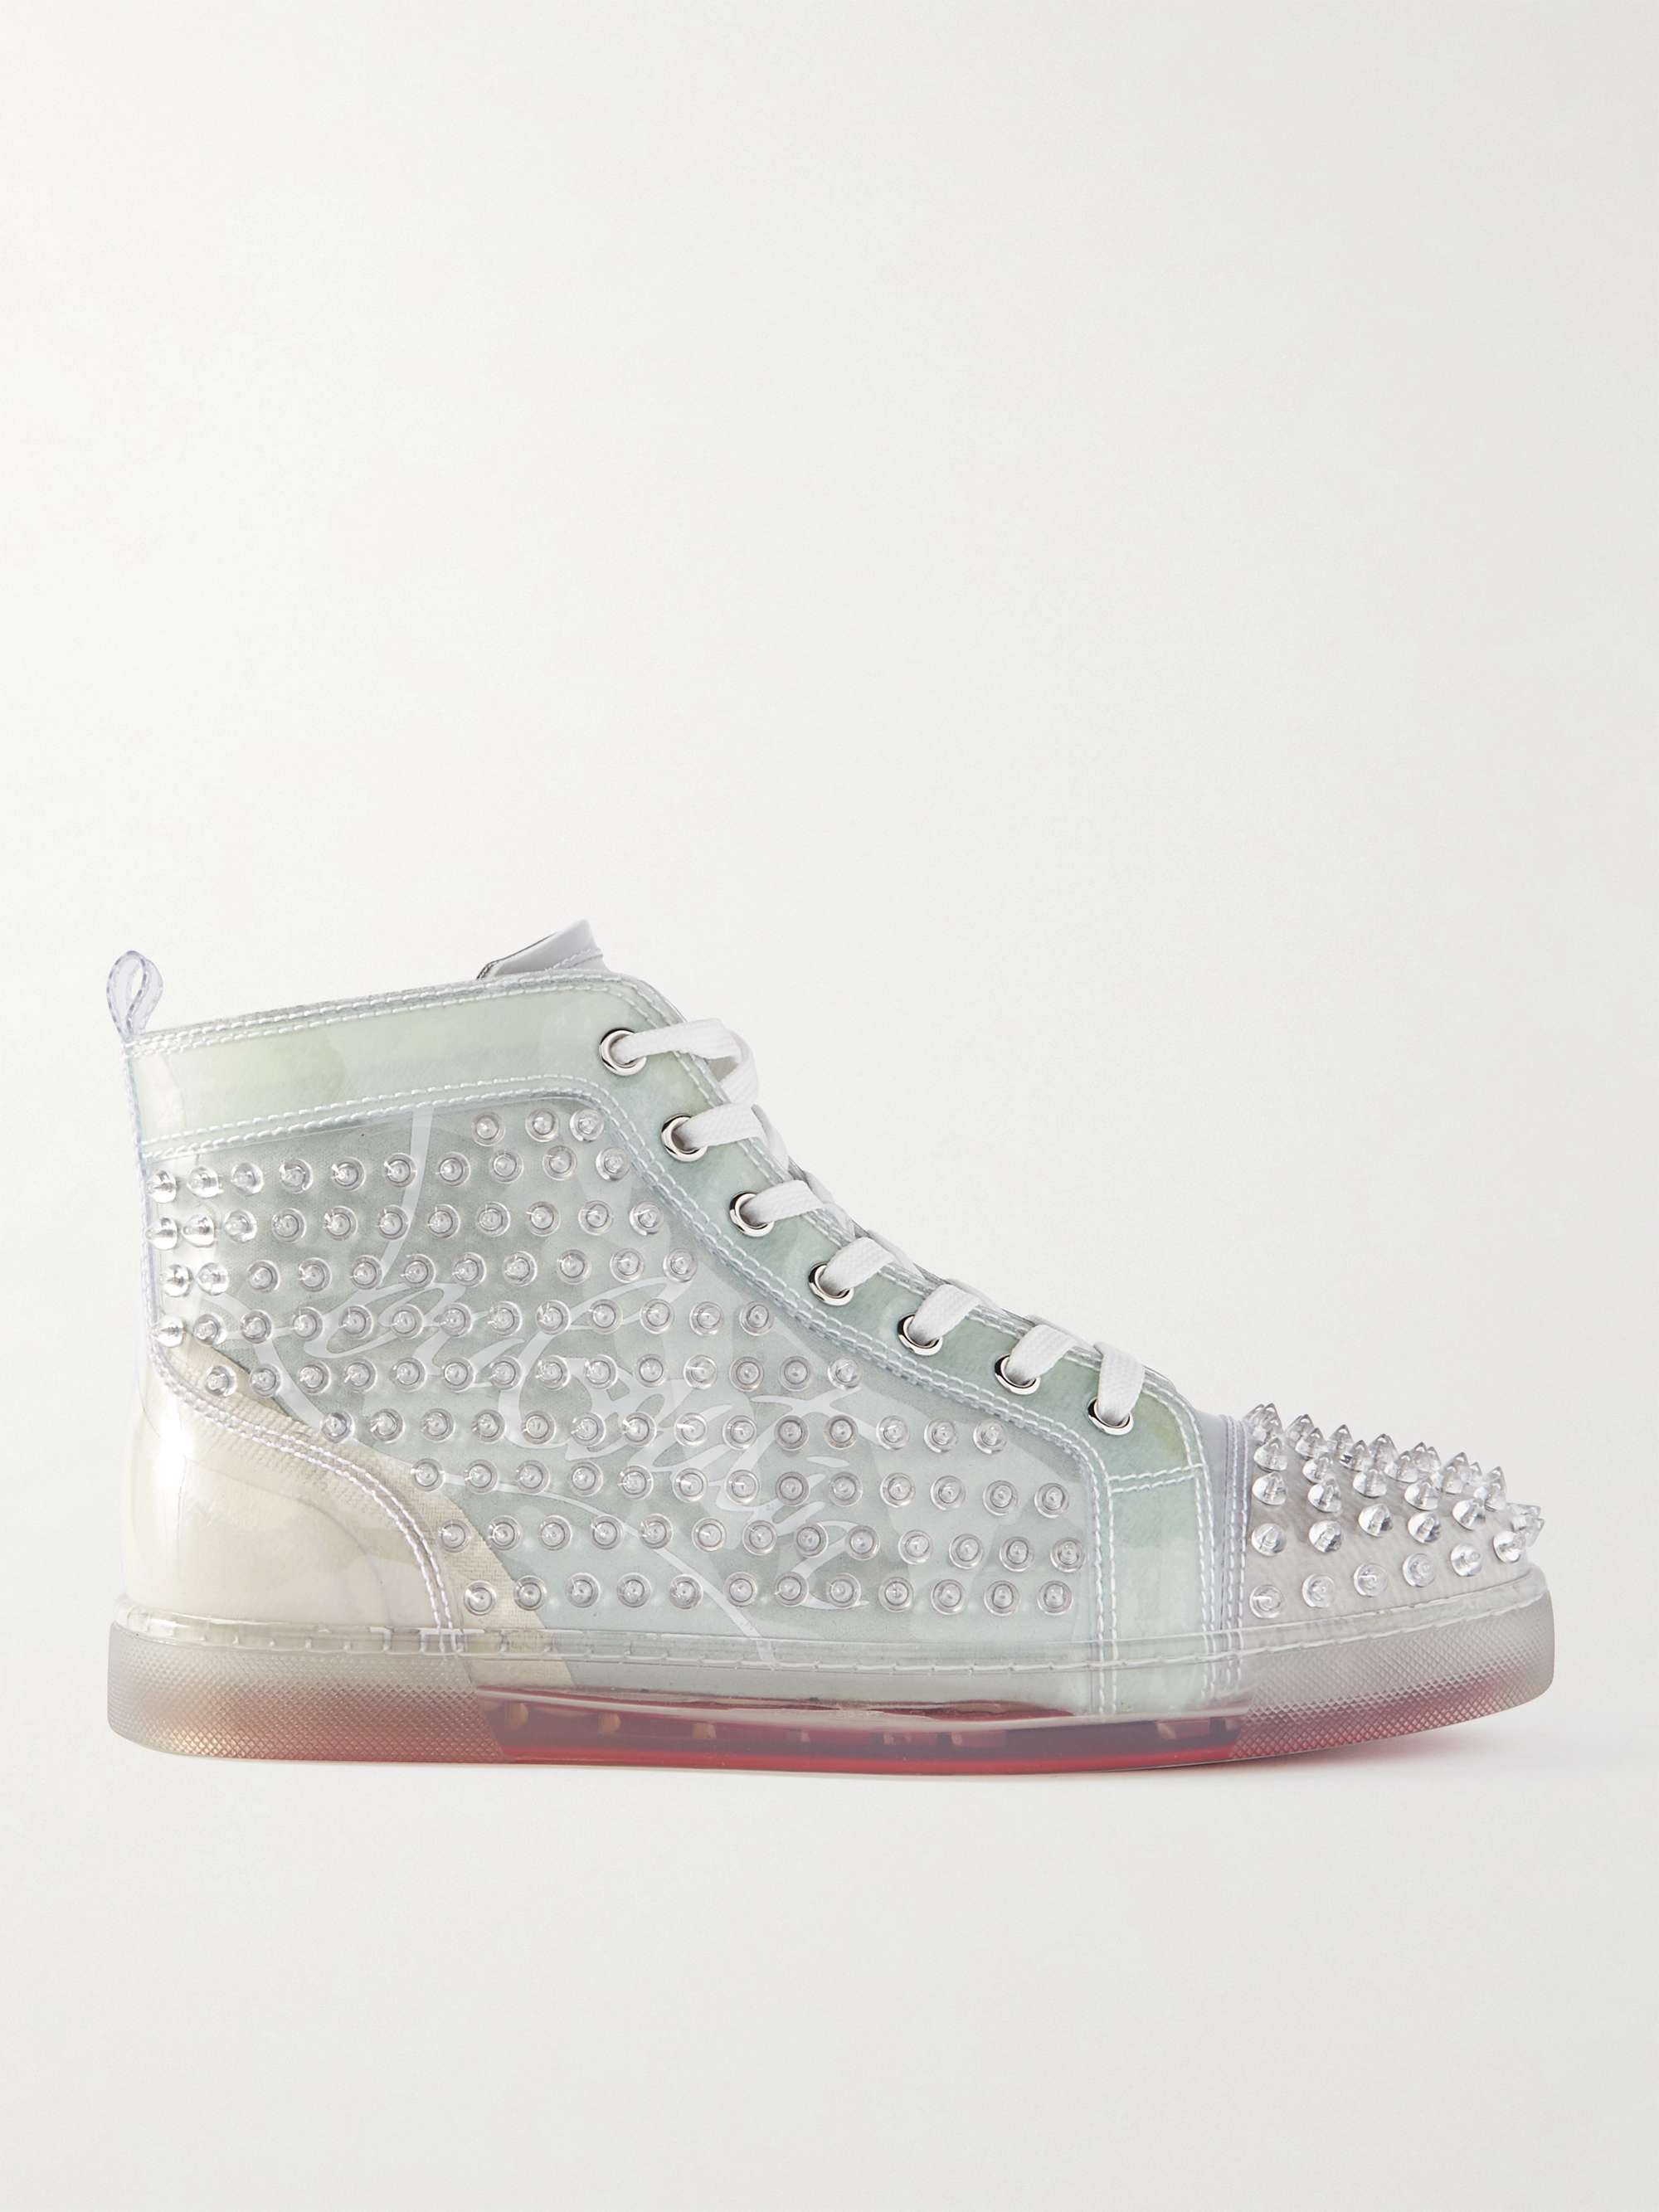 CHRISTIAN LOUBOUTIN Louix Ray Spiked PVC High-Top Sneakers | MR PORTER